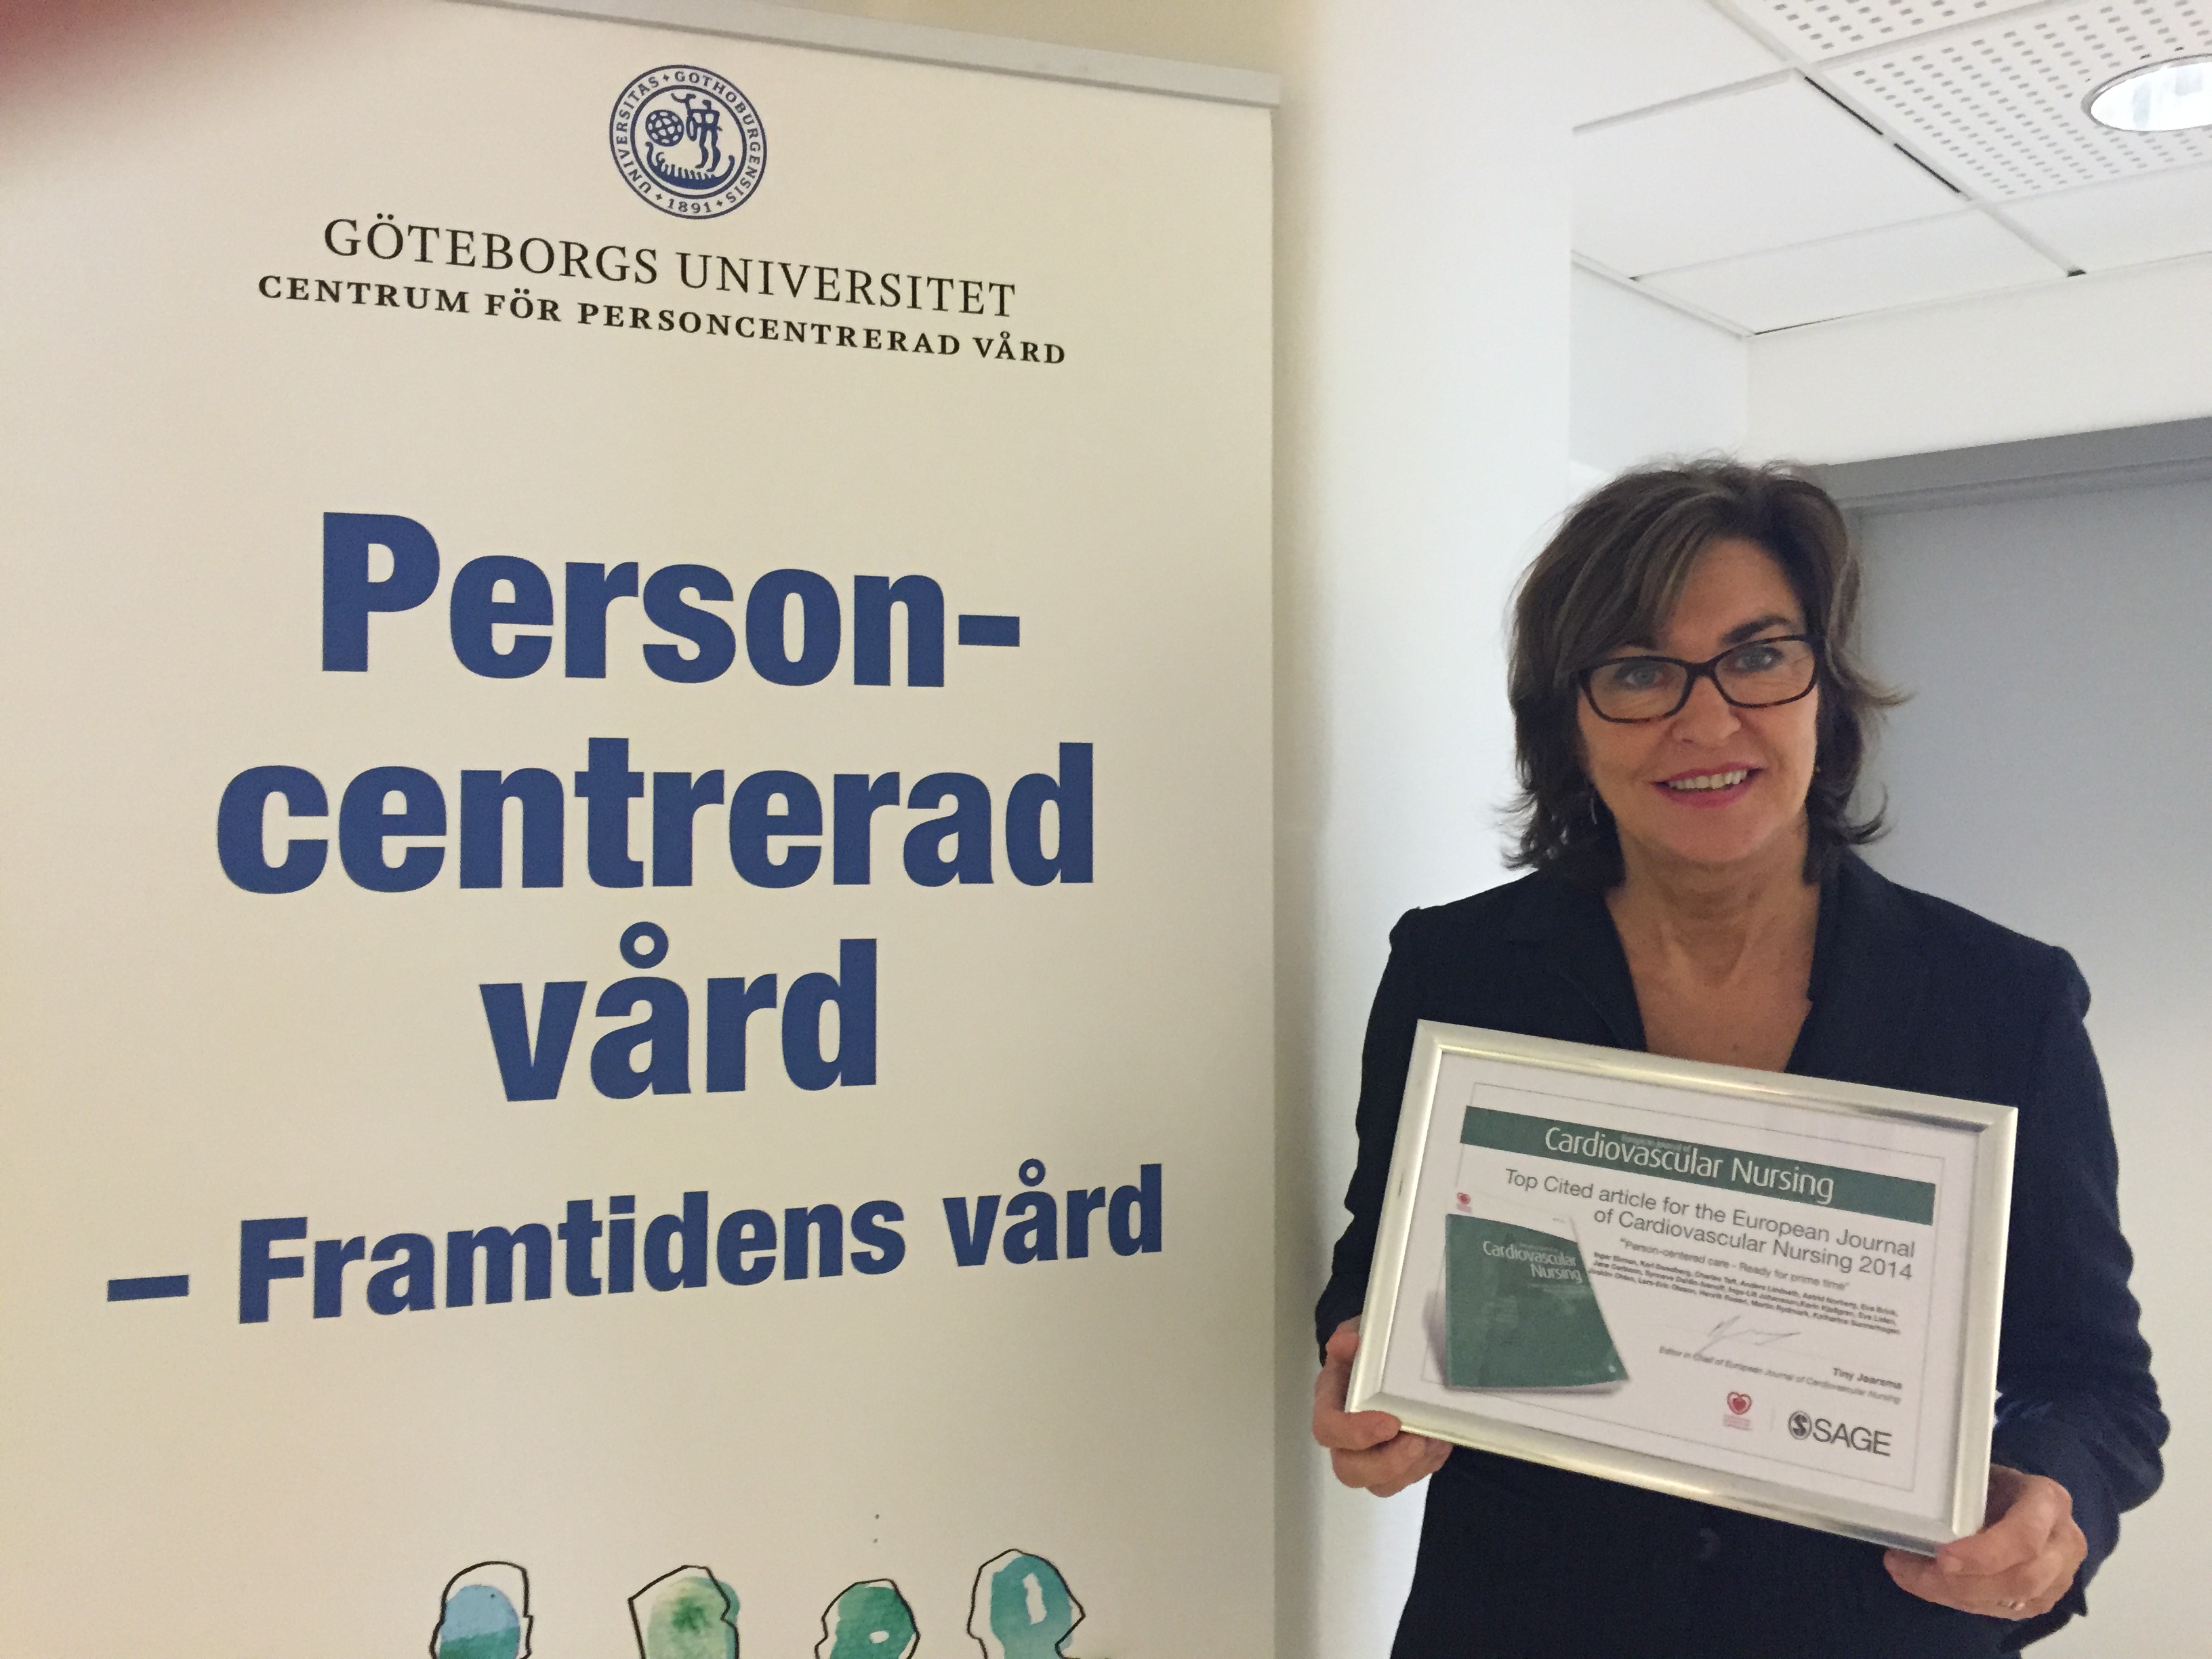 Inger Ekman with Prize for Best Cited Article 2014